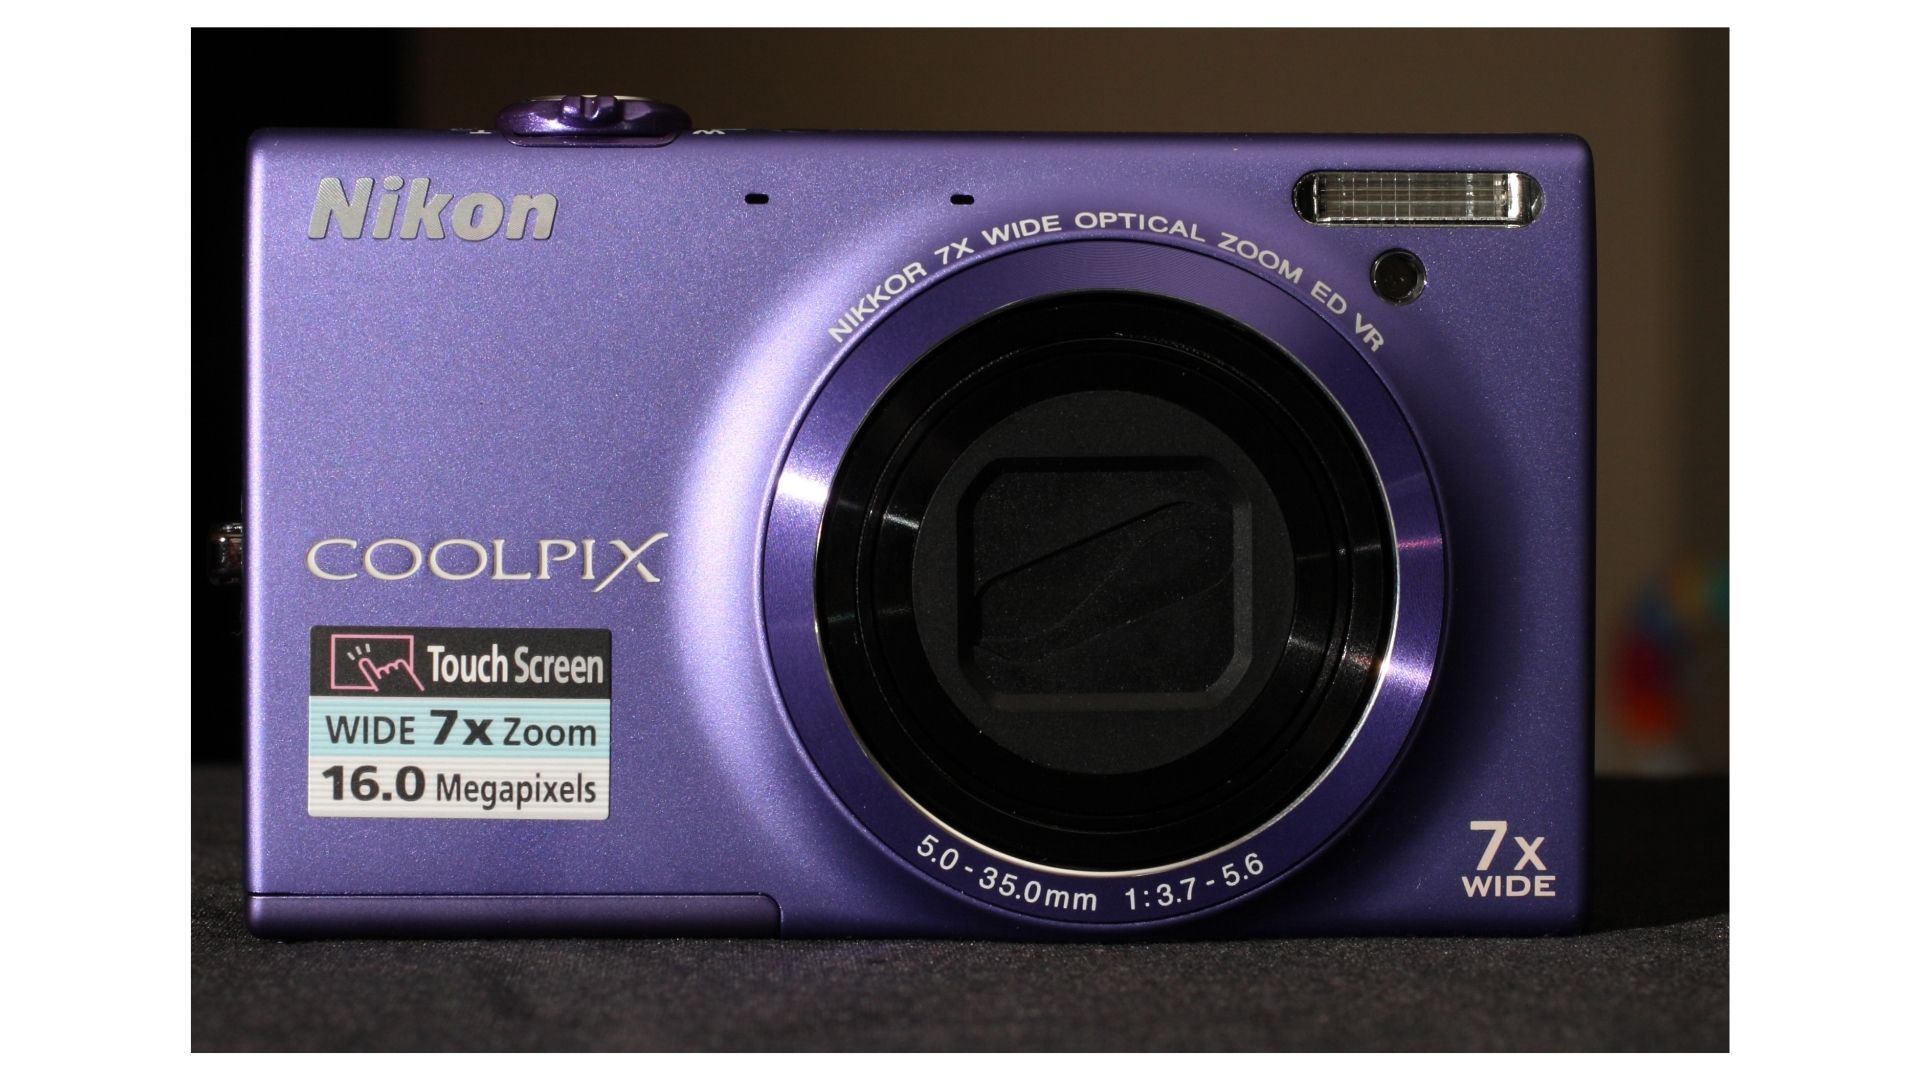 How to charge a Nikon Coolpix camera without the charger - 4 easy Methods -  Camera analyzer